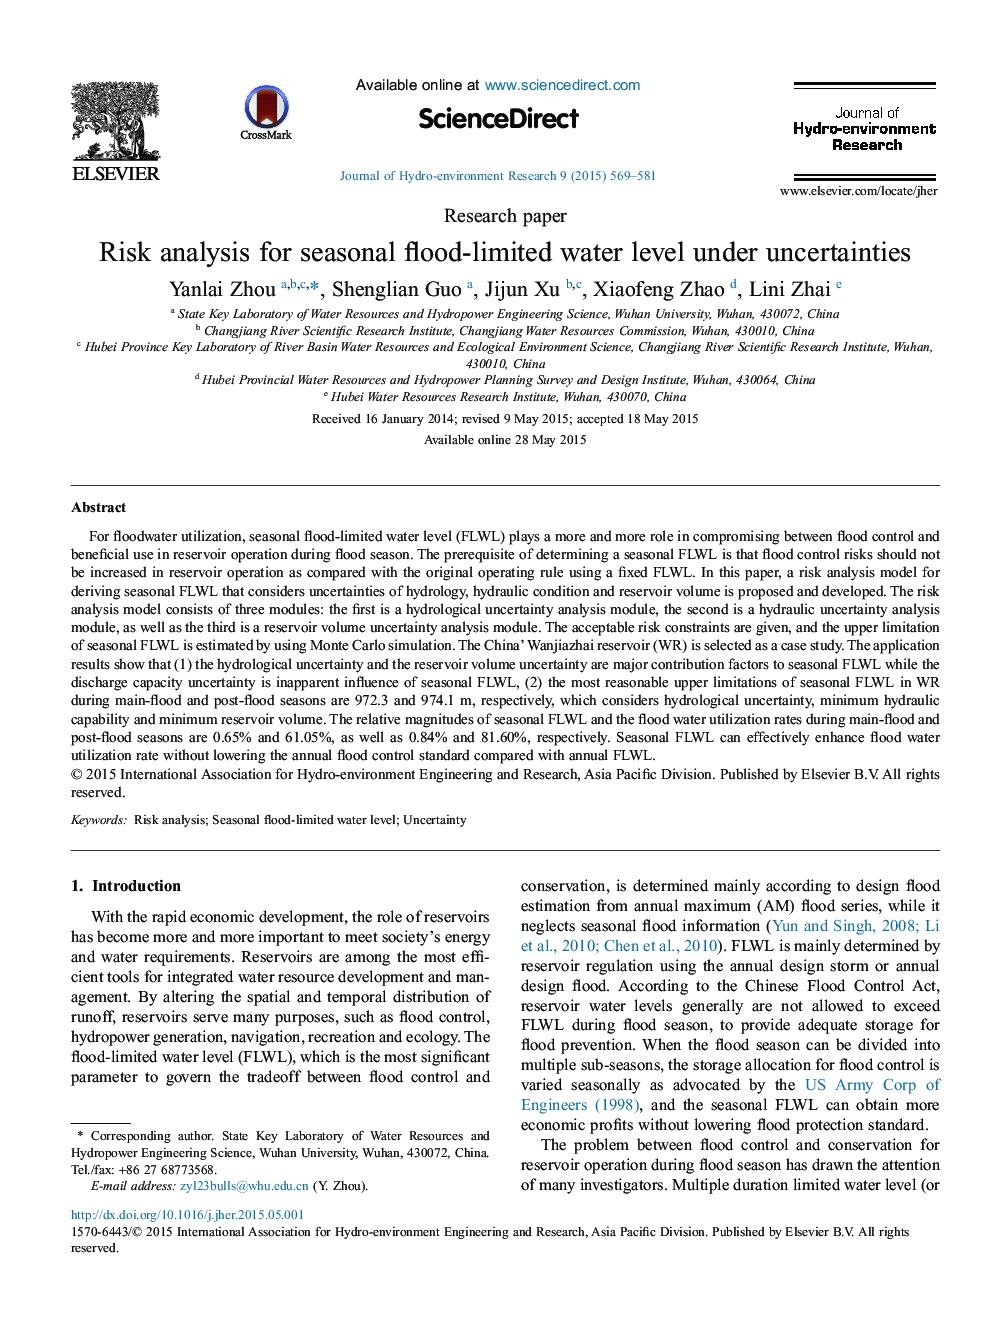 Risk analysis for seasonal flood-limited water level under uncertainties